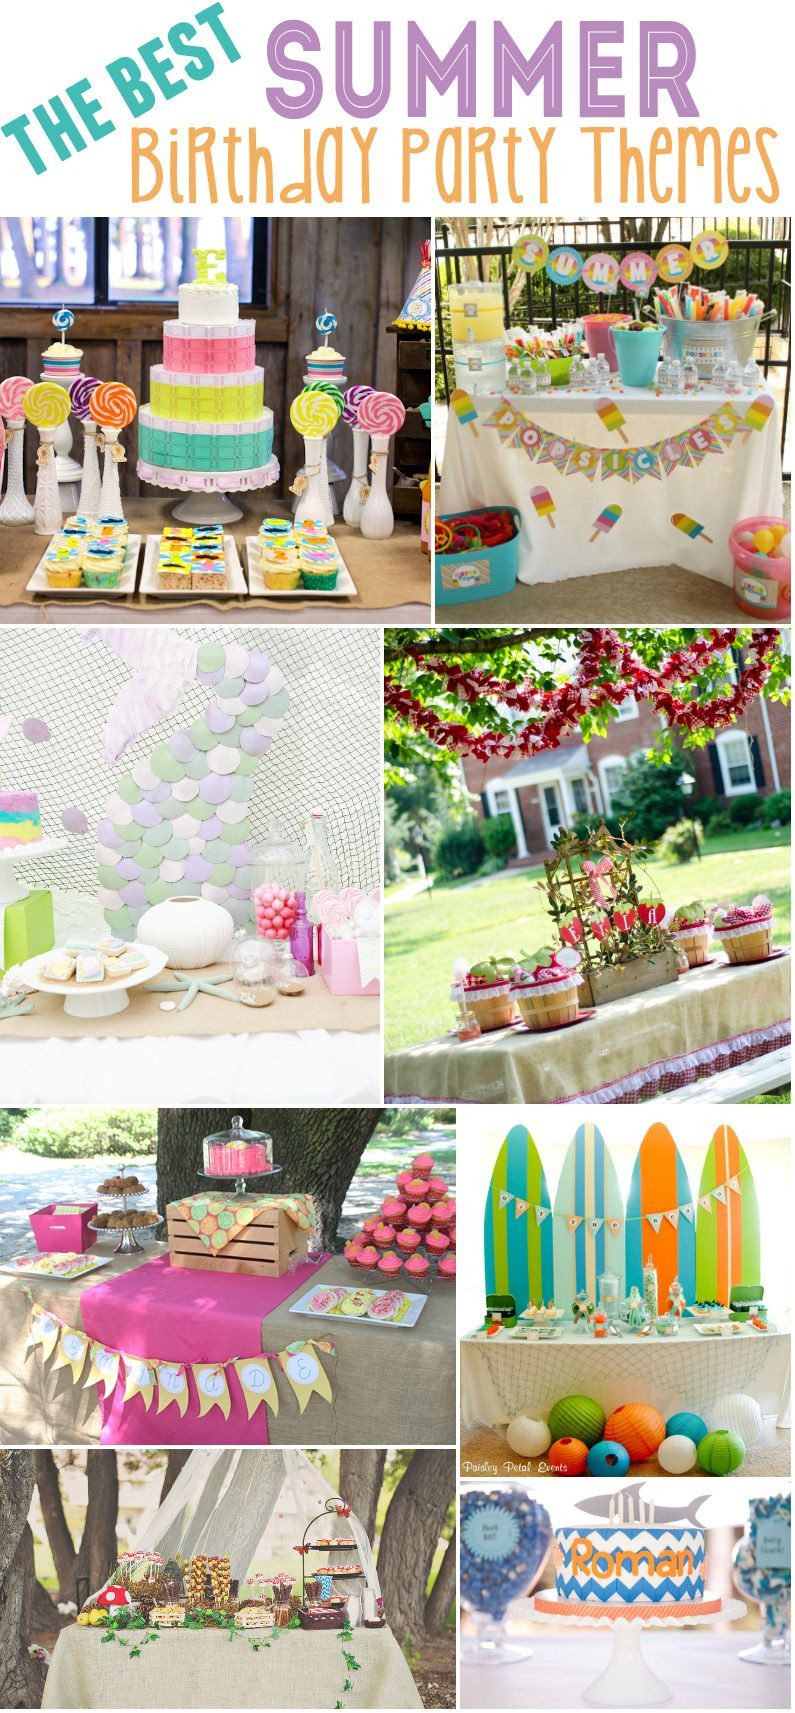 2 Year Old Birthday Party Ideas Summer
 15 Best Summer Birthday Party Themes